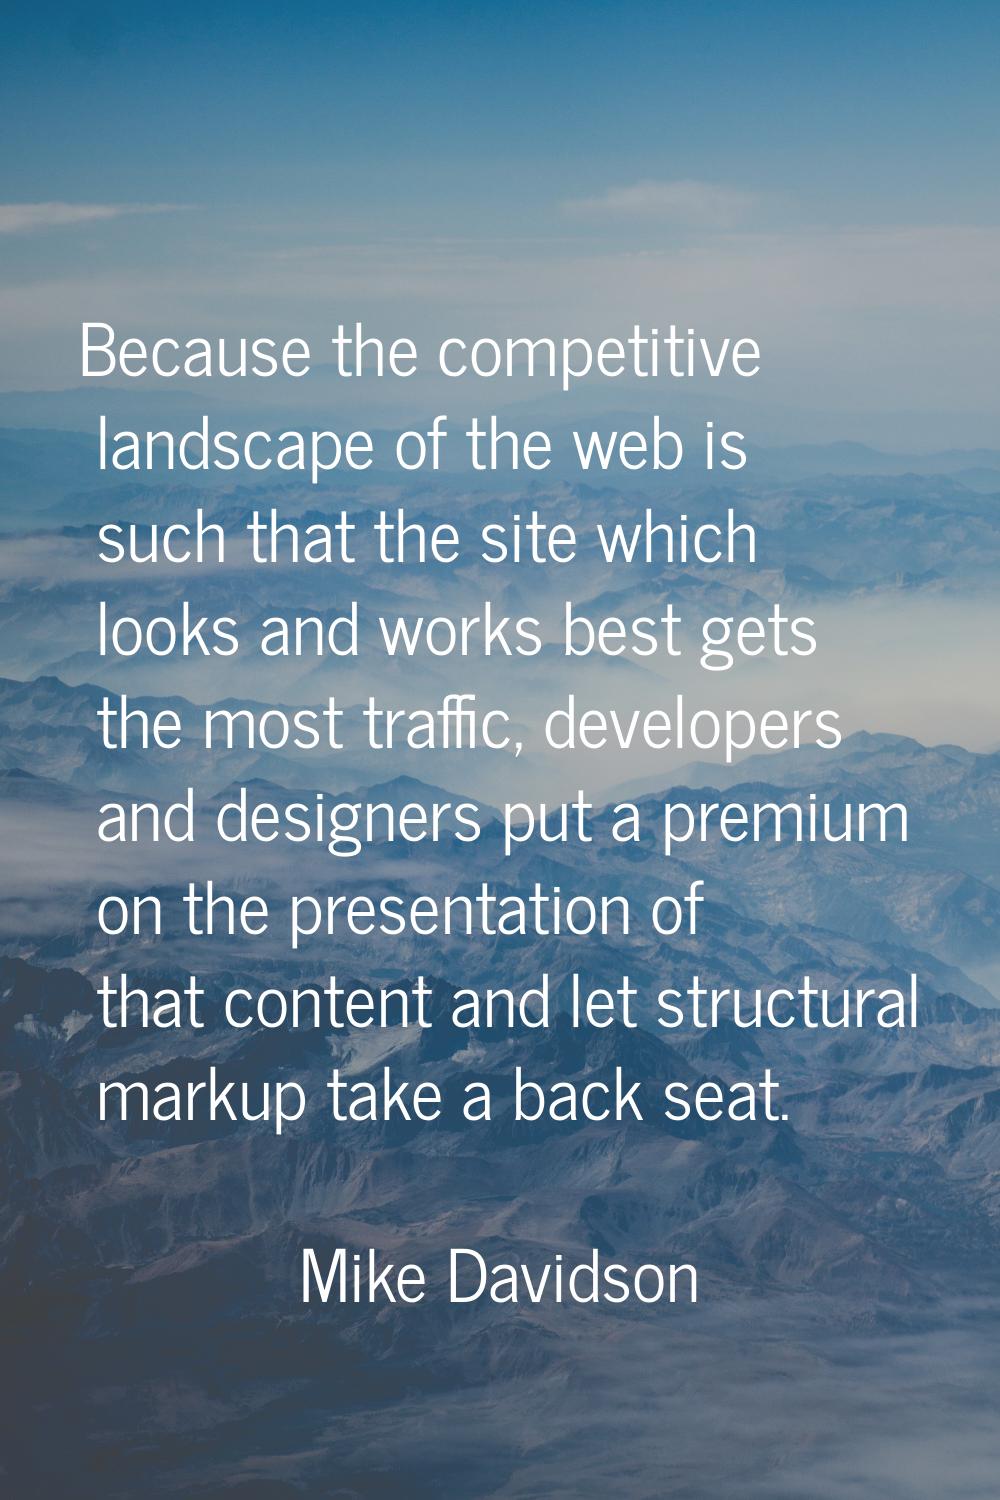 Because the competitive landscape of the web is such that the site which looks and works best gets 